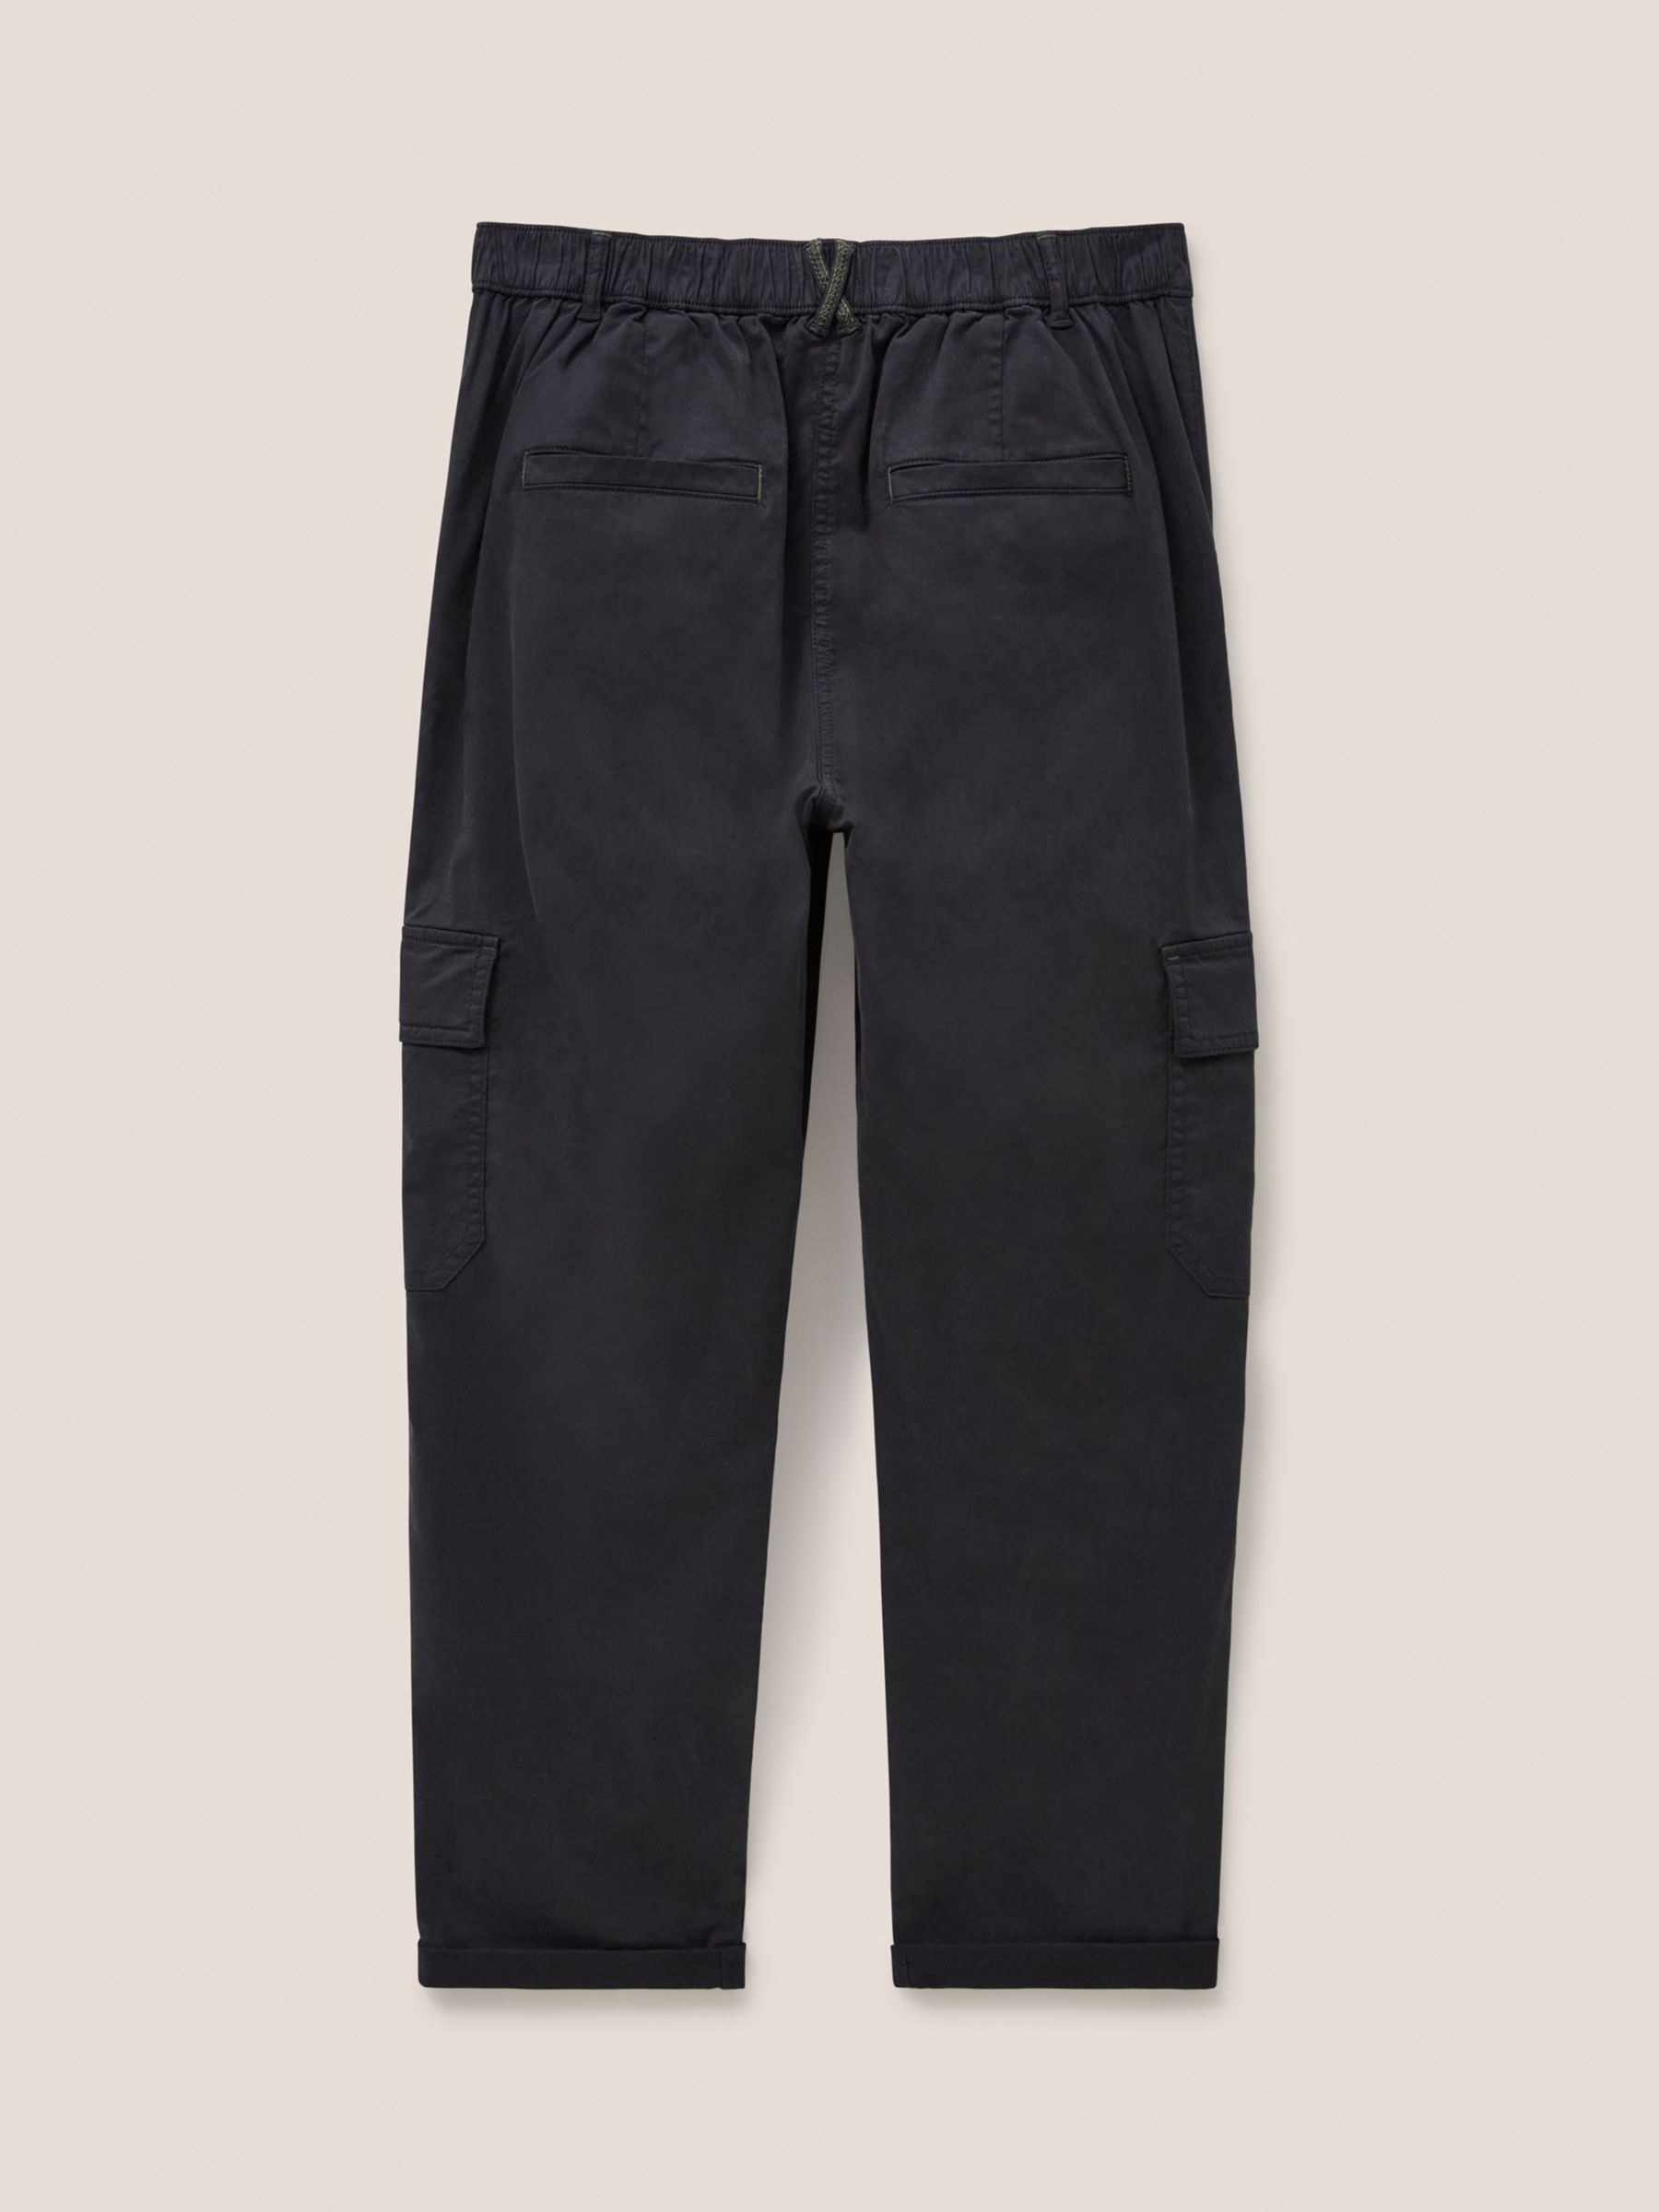 White Stuff Everleigh Cropped Cargo Trousers, Washed Black at John ...